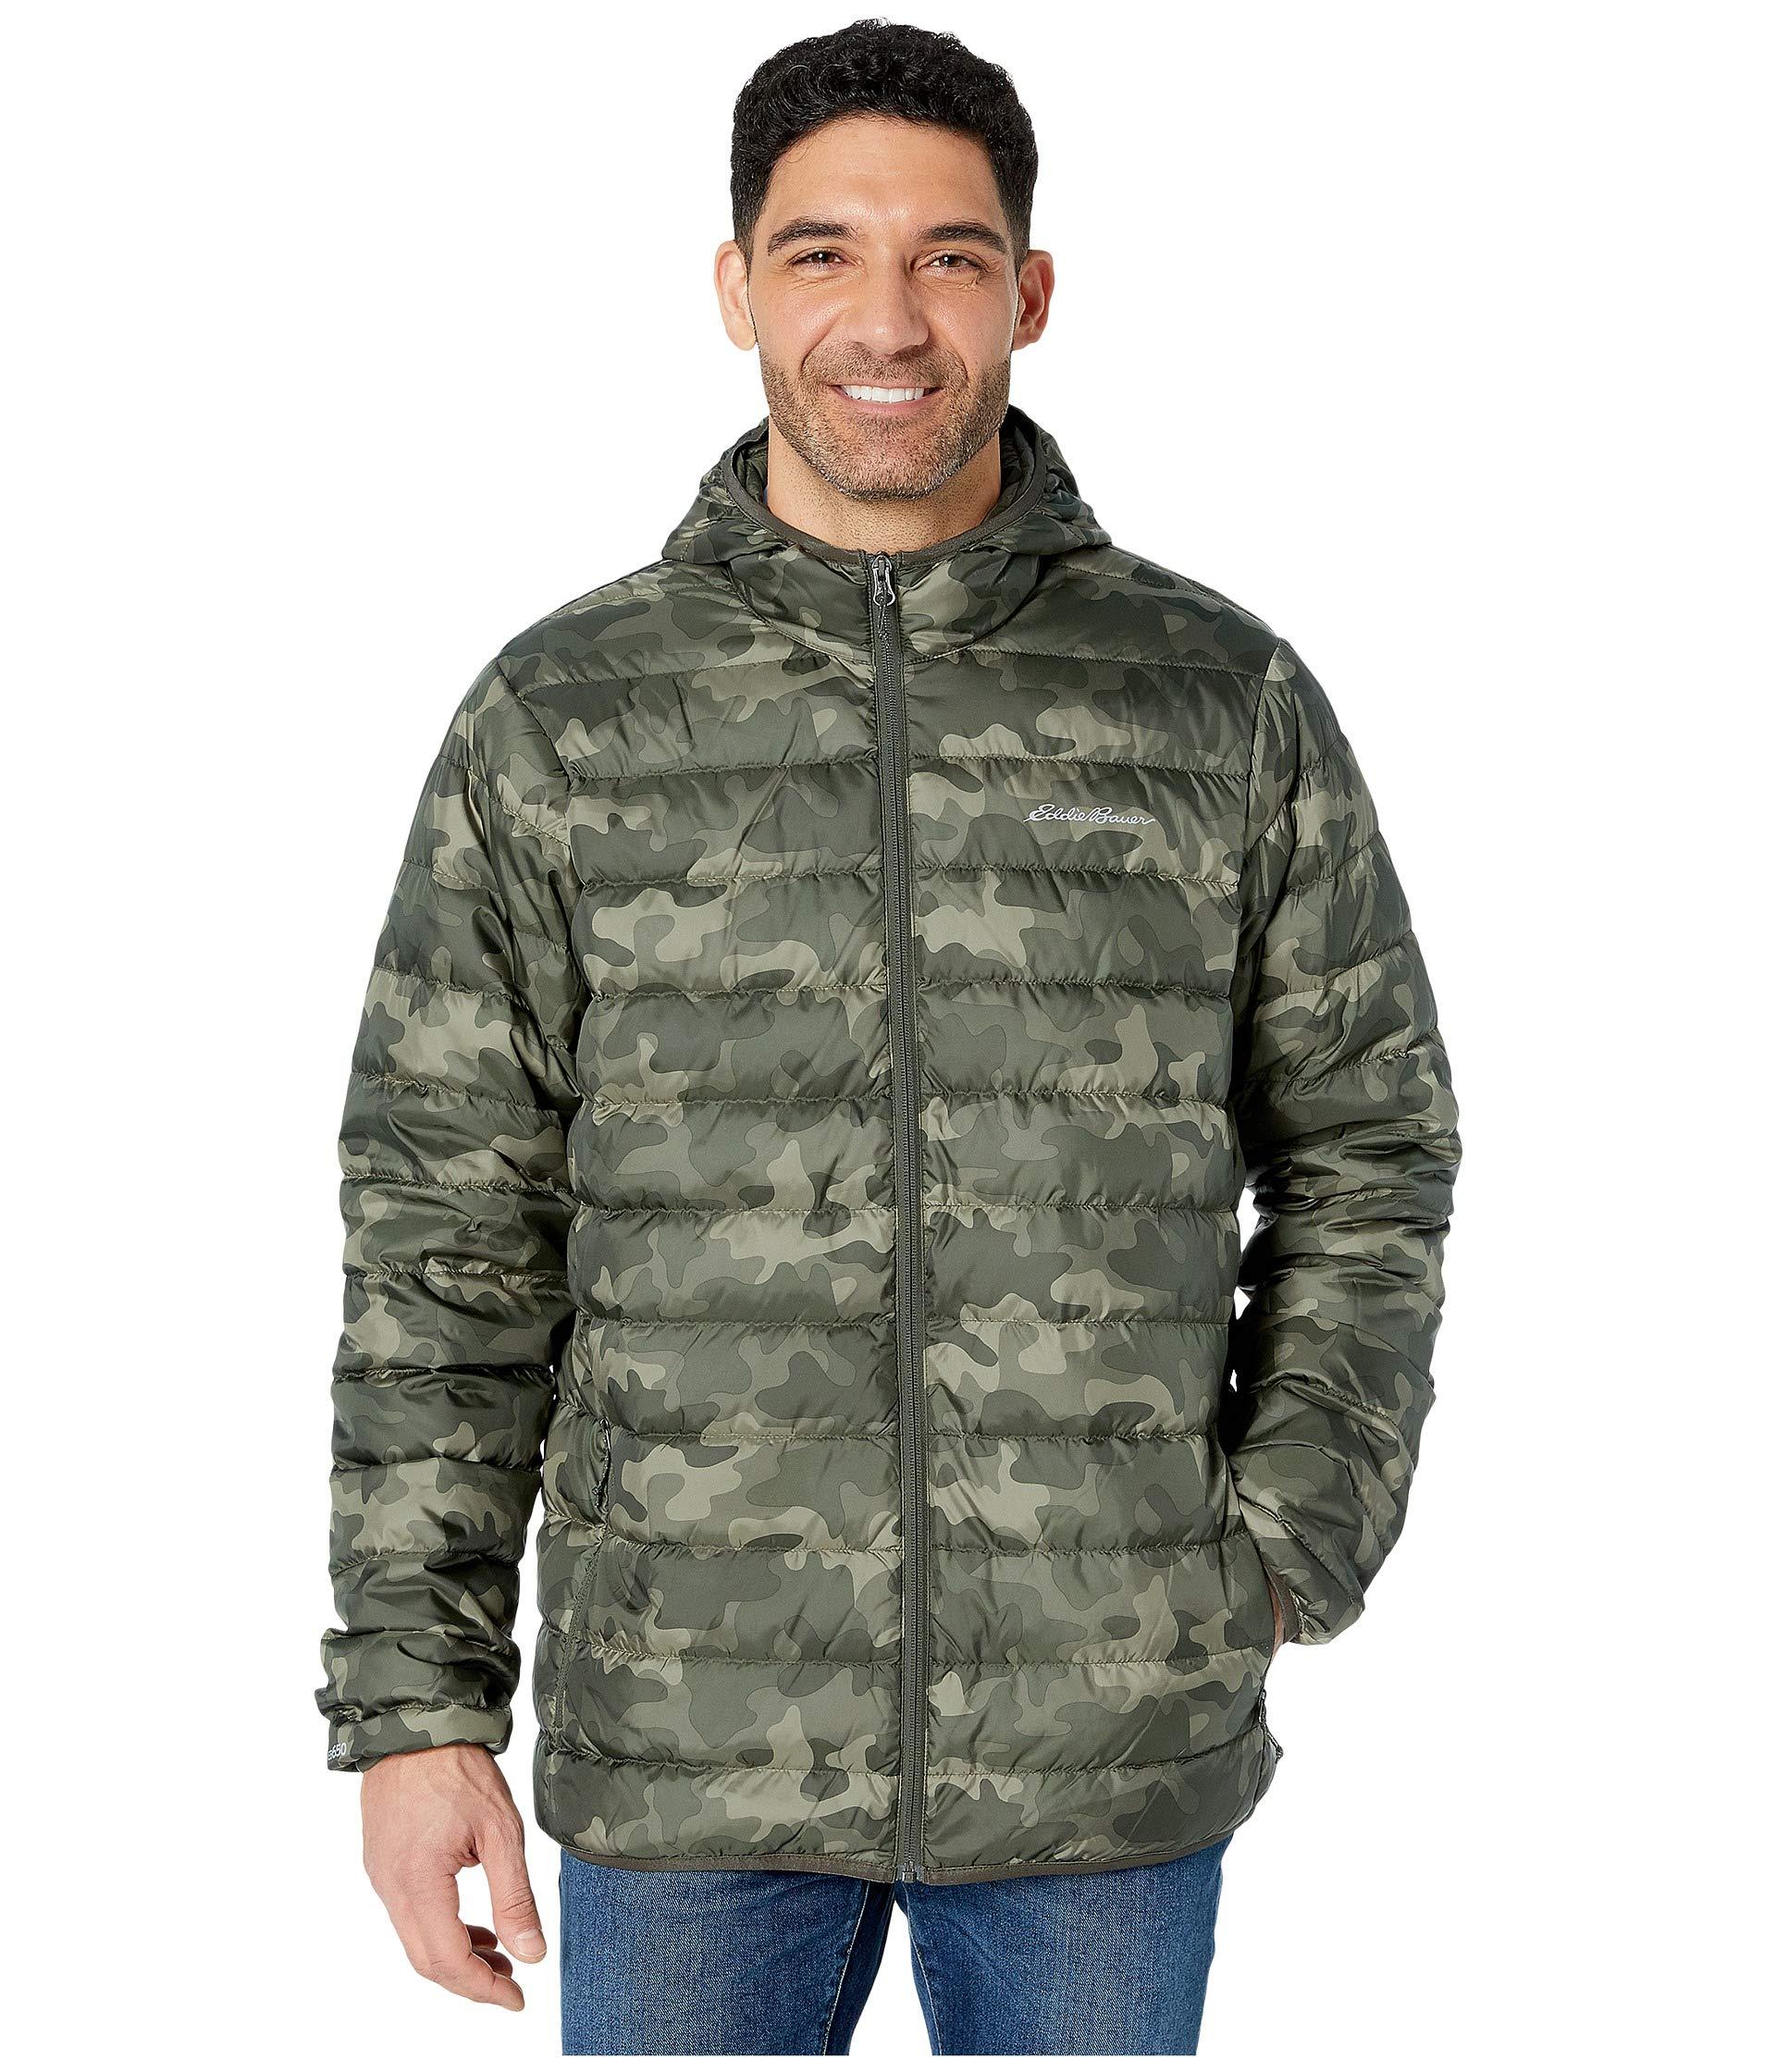 eddie bauer hooded puffer jacket, amazing clearance 76% off -  www.wingspantg.com